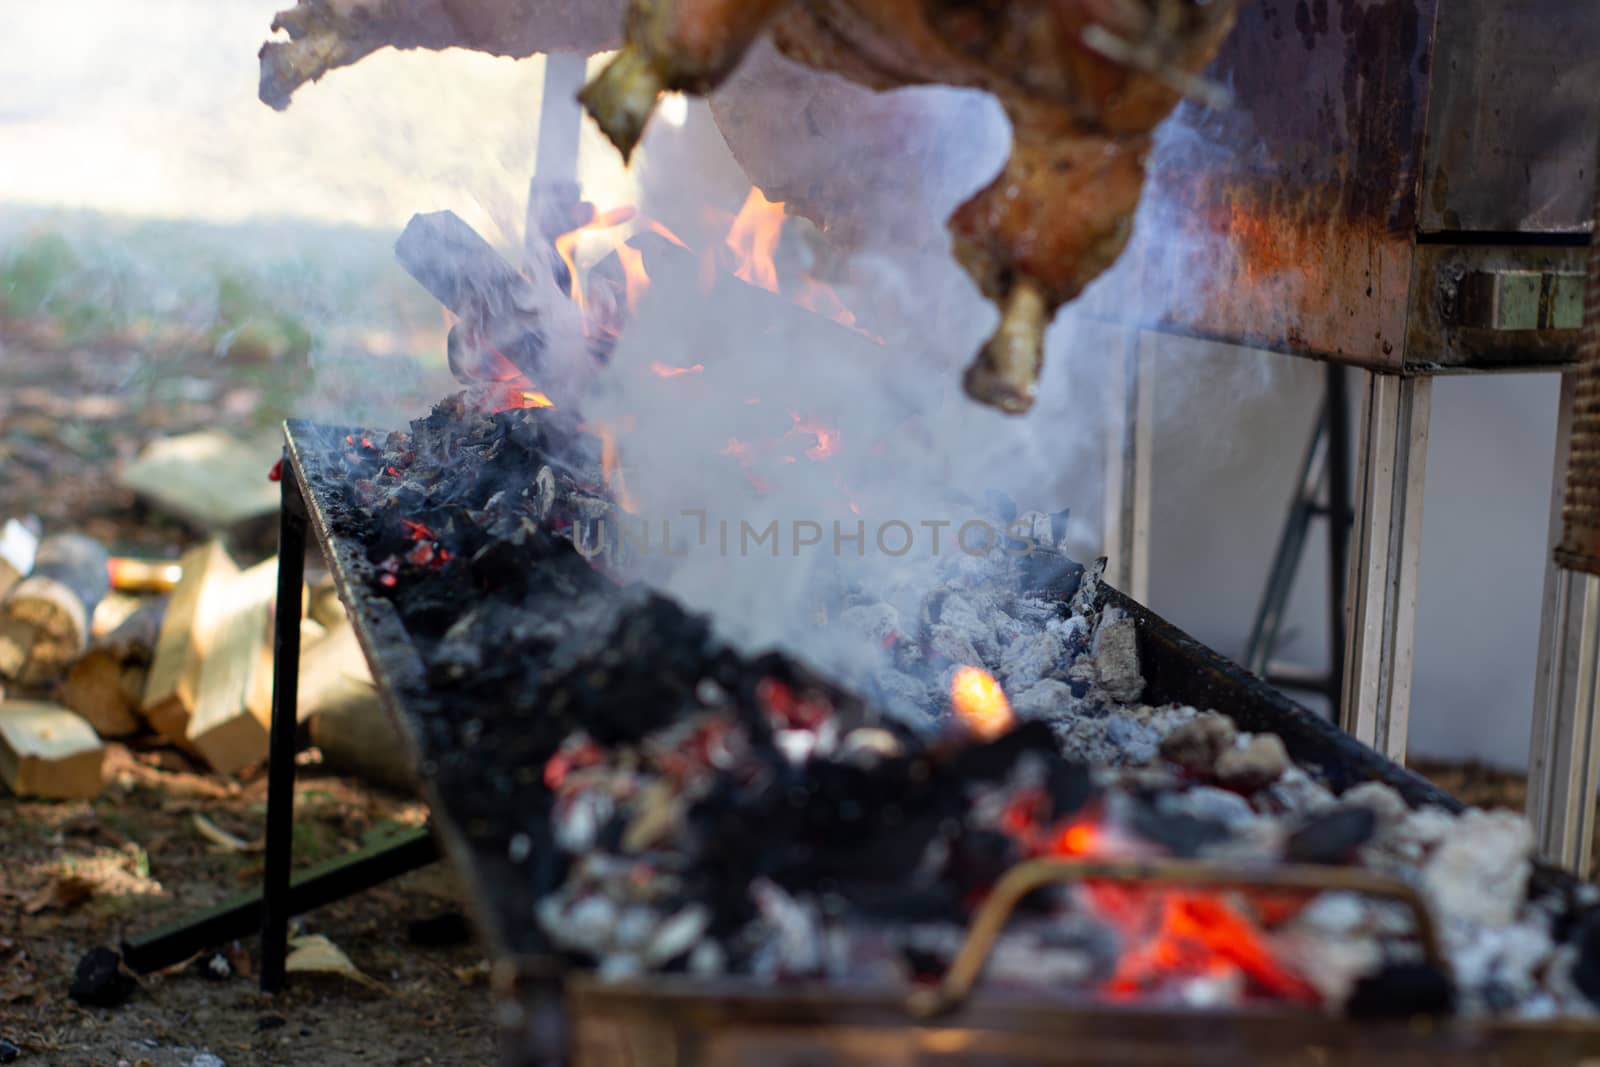 Roast pig on a spit. Pig cooking in Germany.